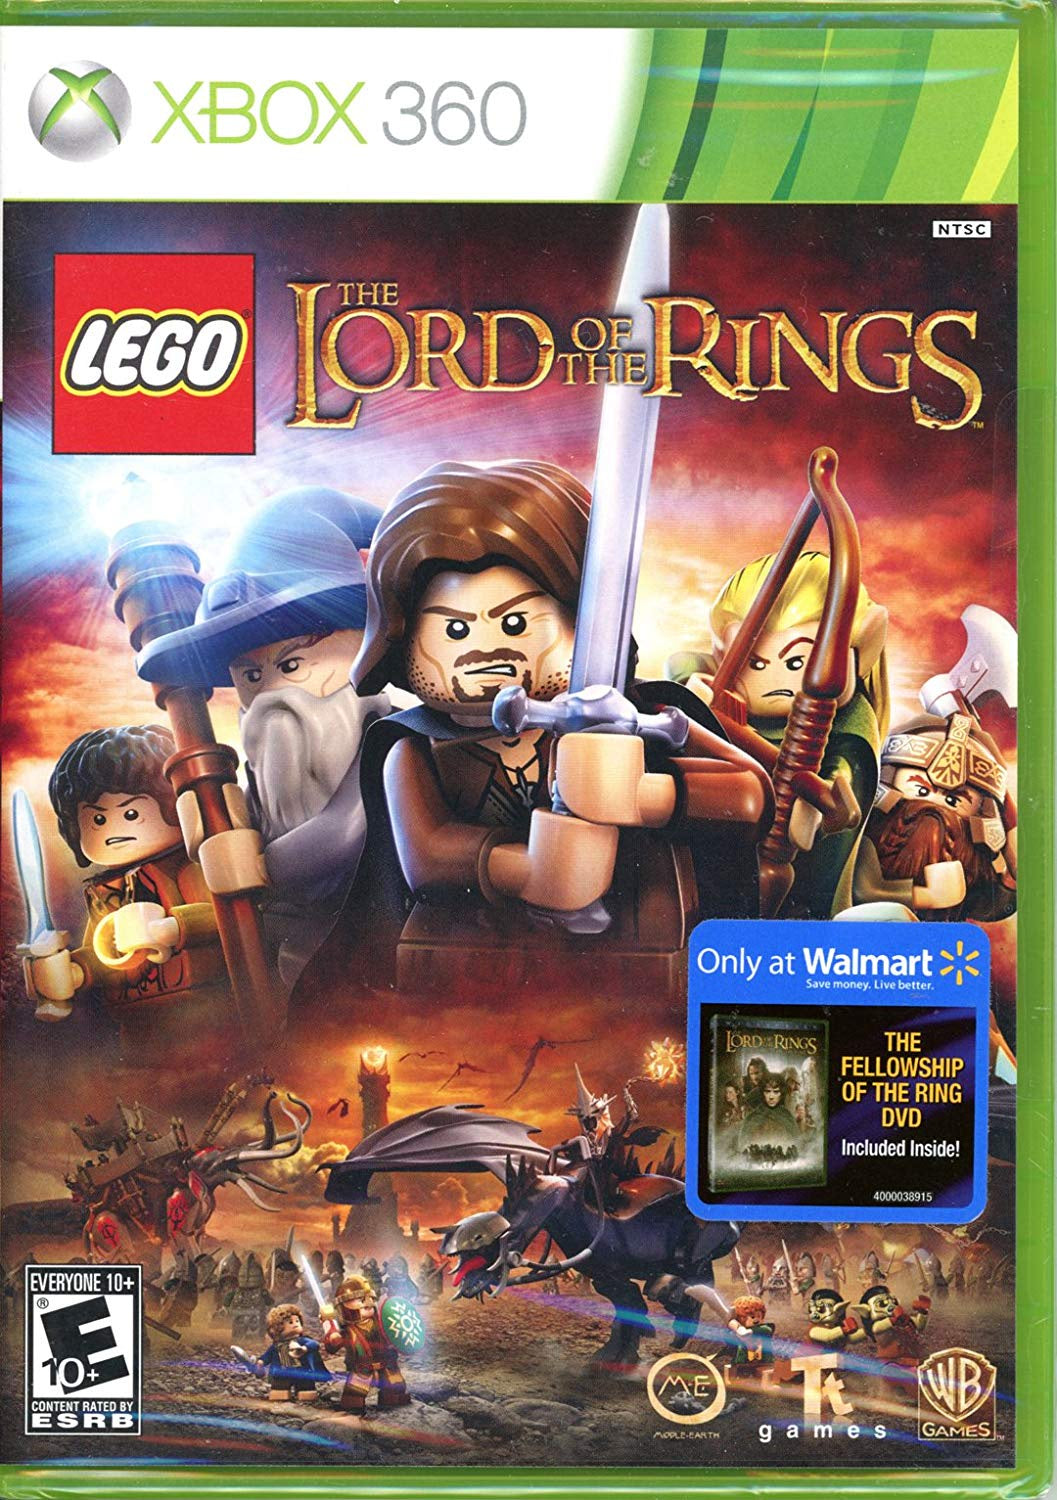 LEGO Lord Of The Rings - Xbox 360 (Pre-owned)